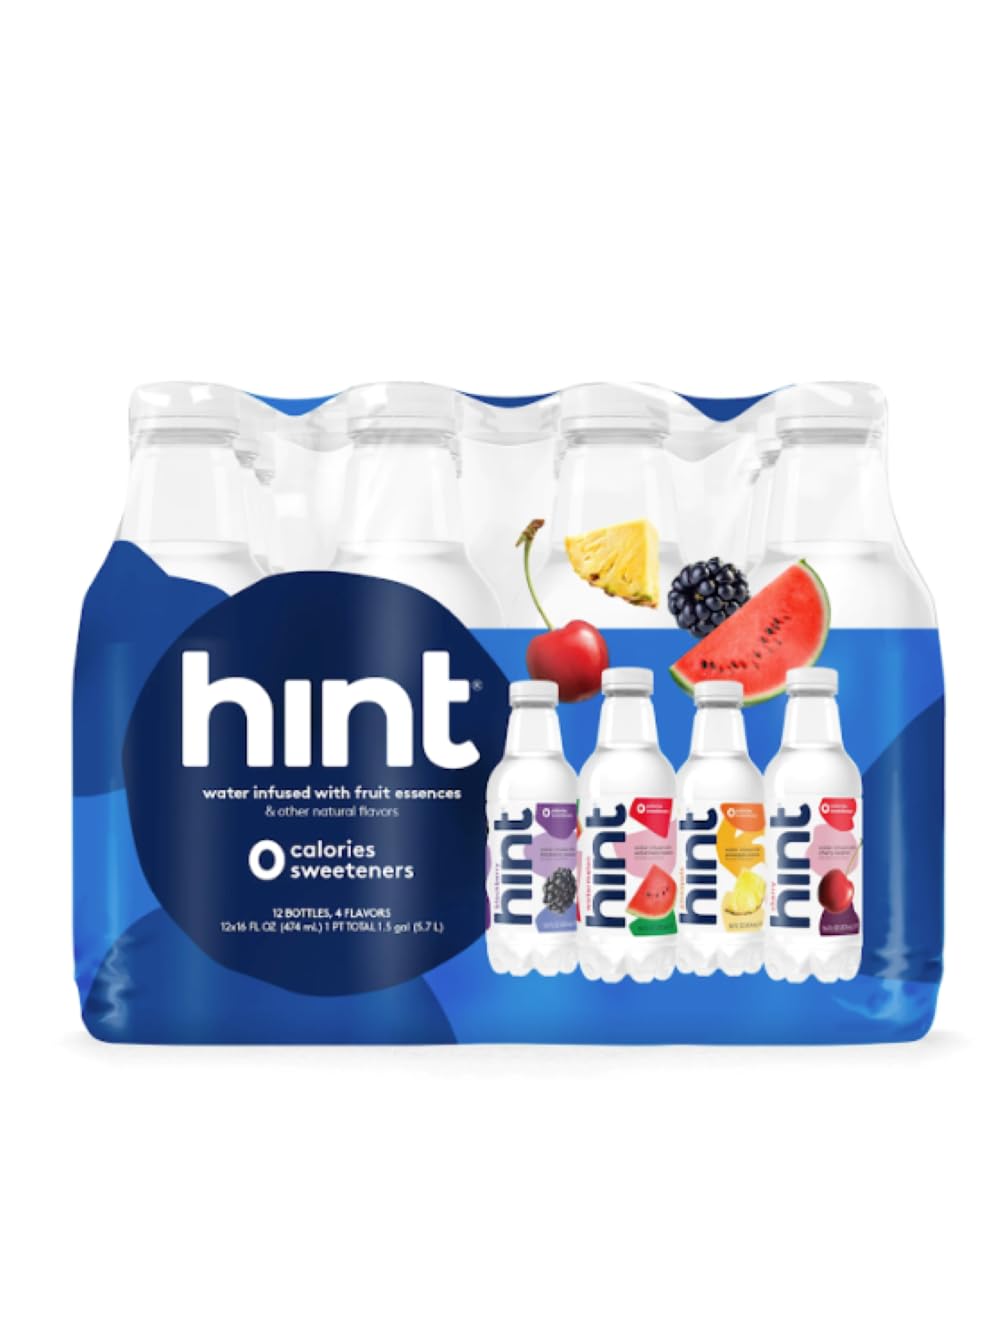 Hint Water Best Sellers Pack (Pack of 12), 16 Ounce Bottles, 3 Bottles Each of: Watermelon, Blackberry, Cherry, and Pineapple, Zero Calories, Zero Sugar and Zero Sweeteners